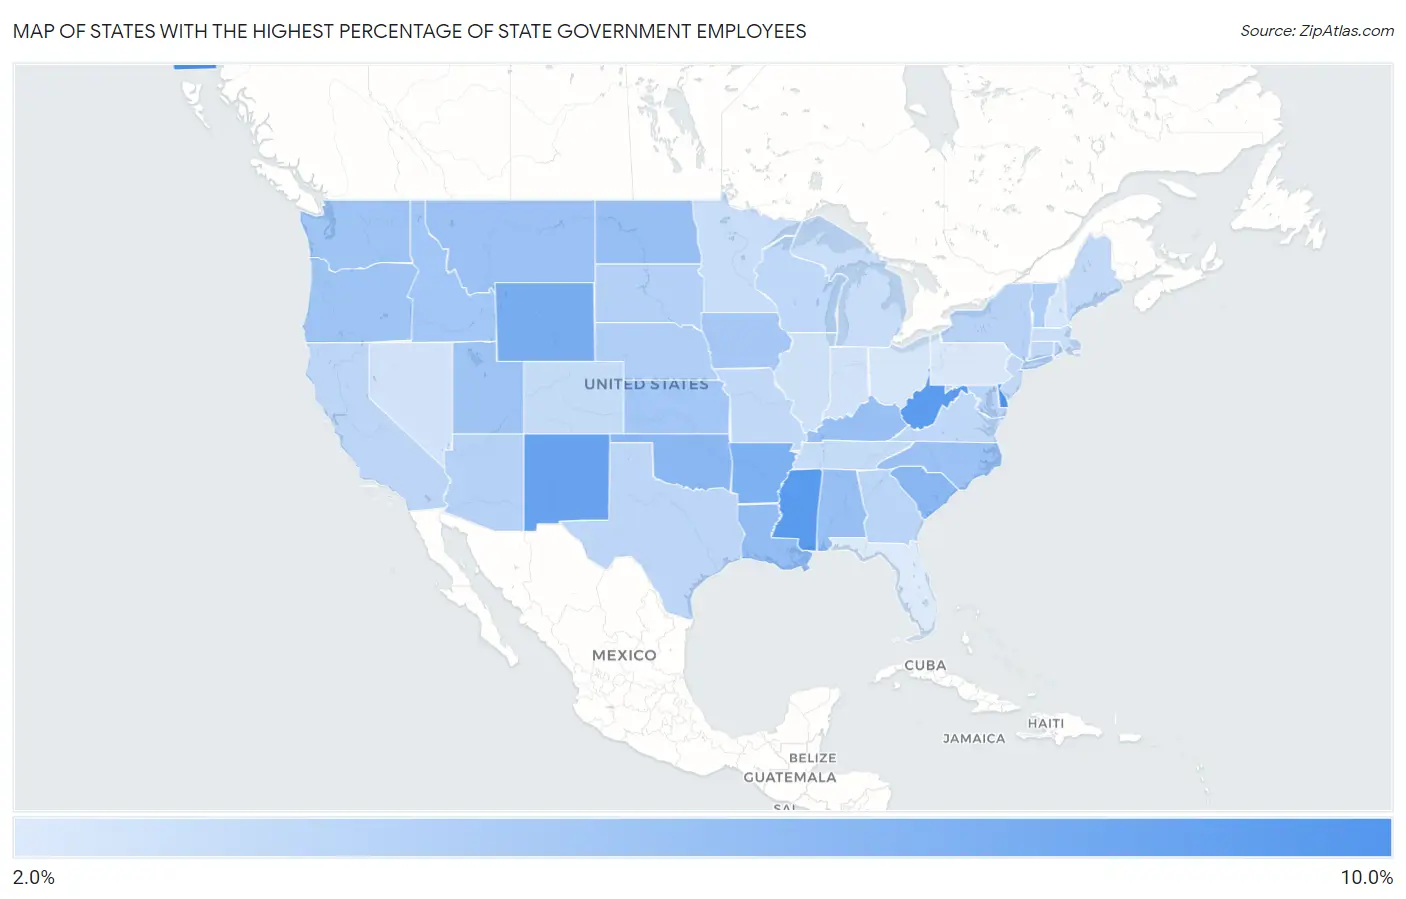 States with the Highest Percentage of State Government Employees in the United States Map